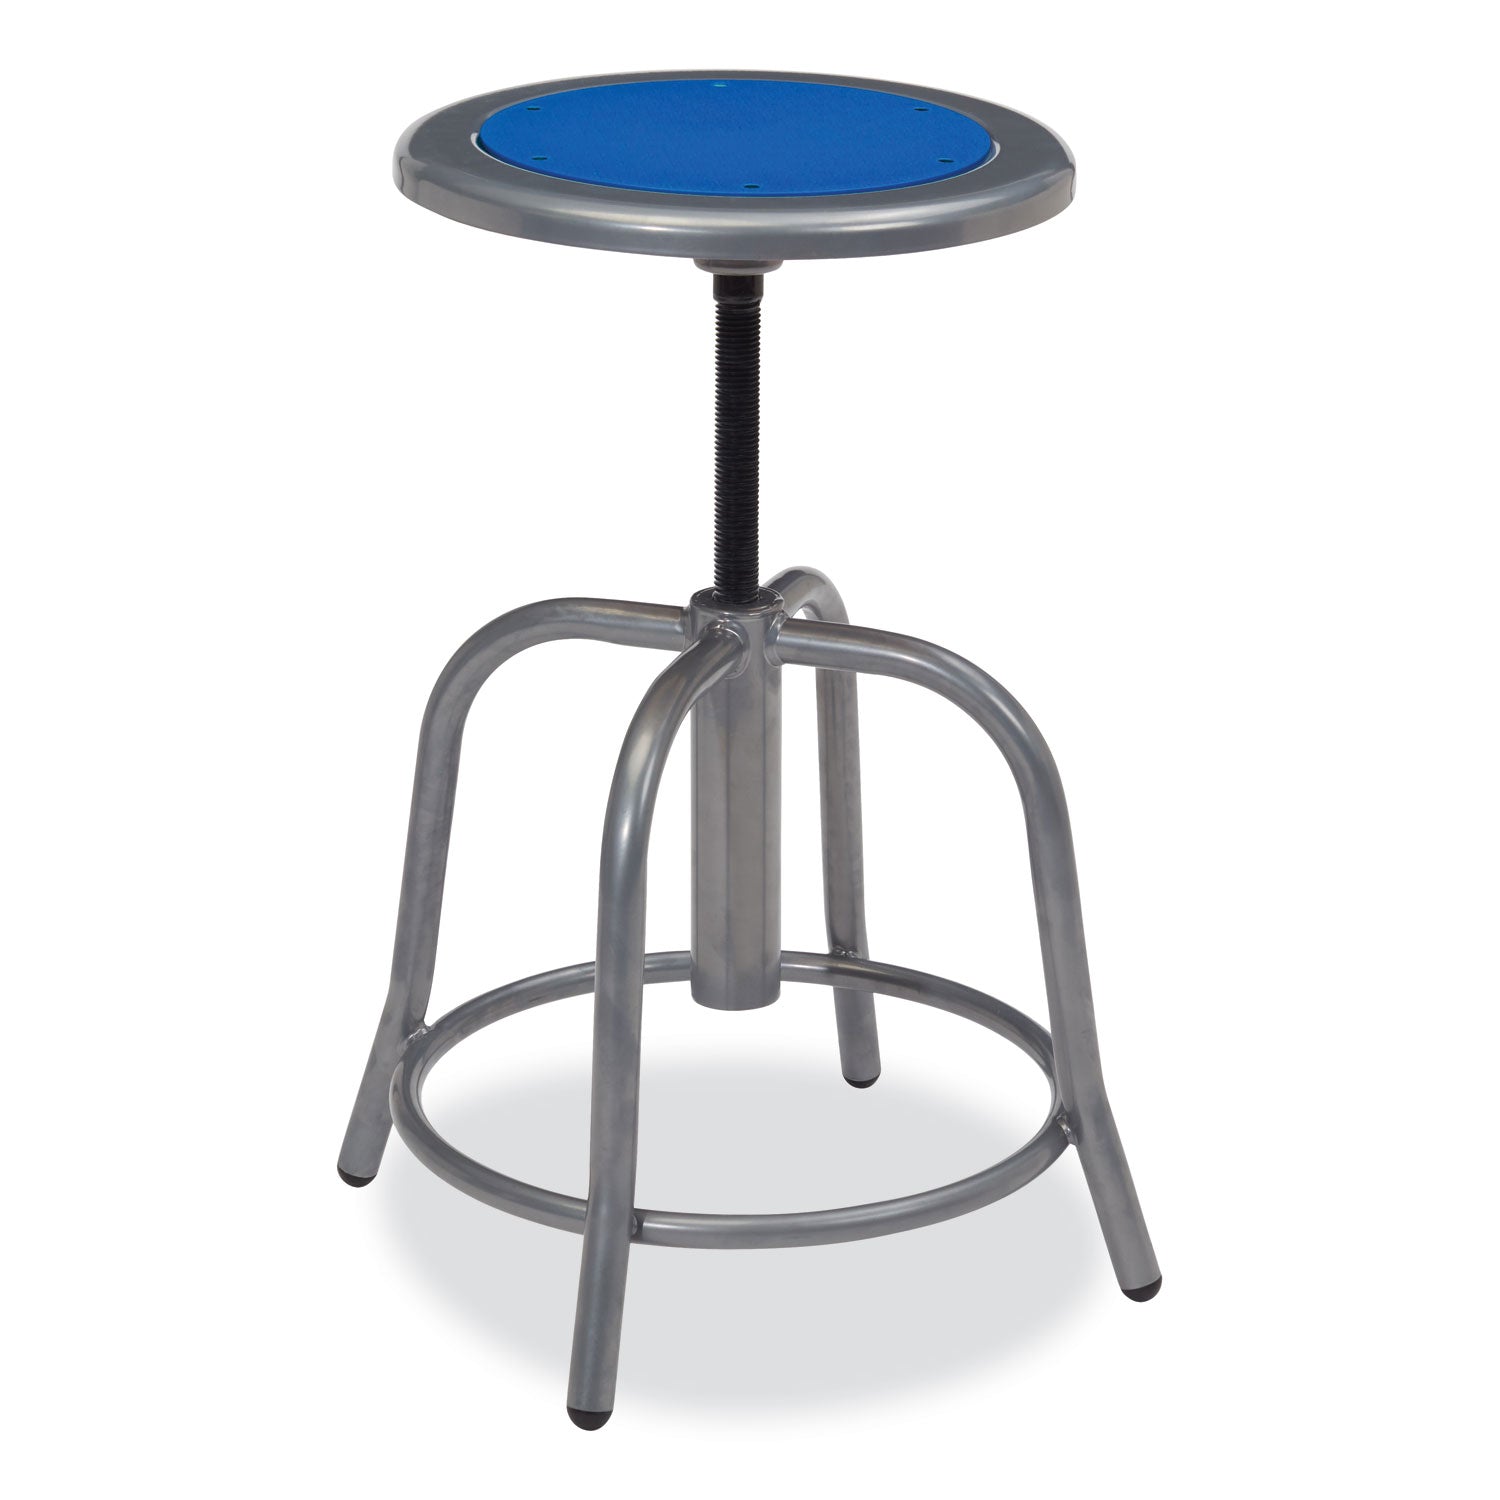 6800-series-height-adj-metal-seat-stool-supports-300-lb-18-24-seat-ht-persian-blue-seat-gray-base-ships-in-1-3-bus-days_nps682502 - 2